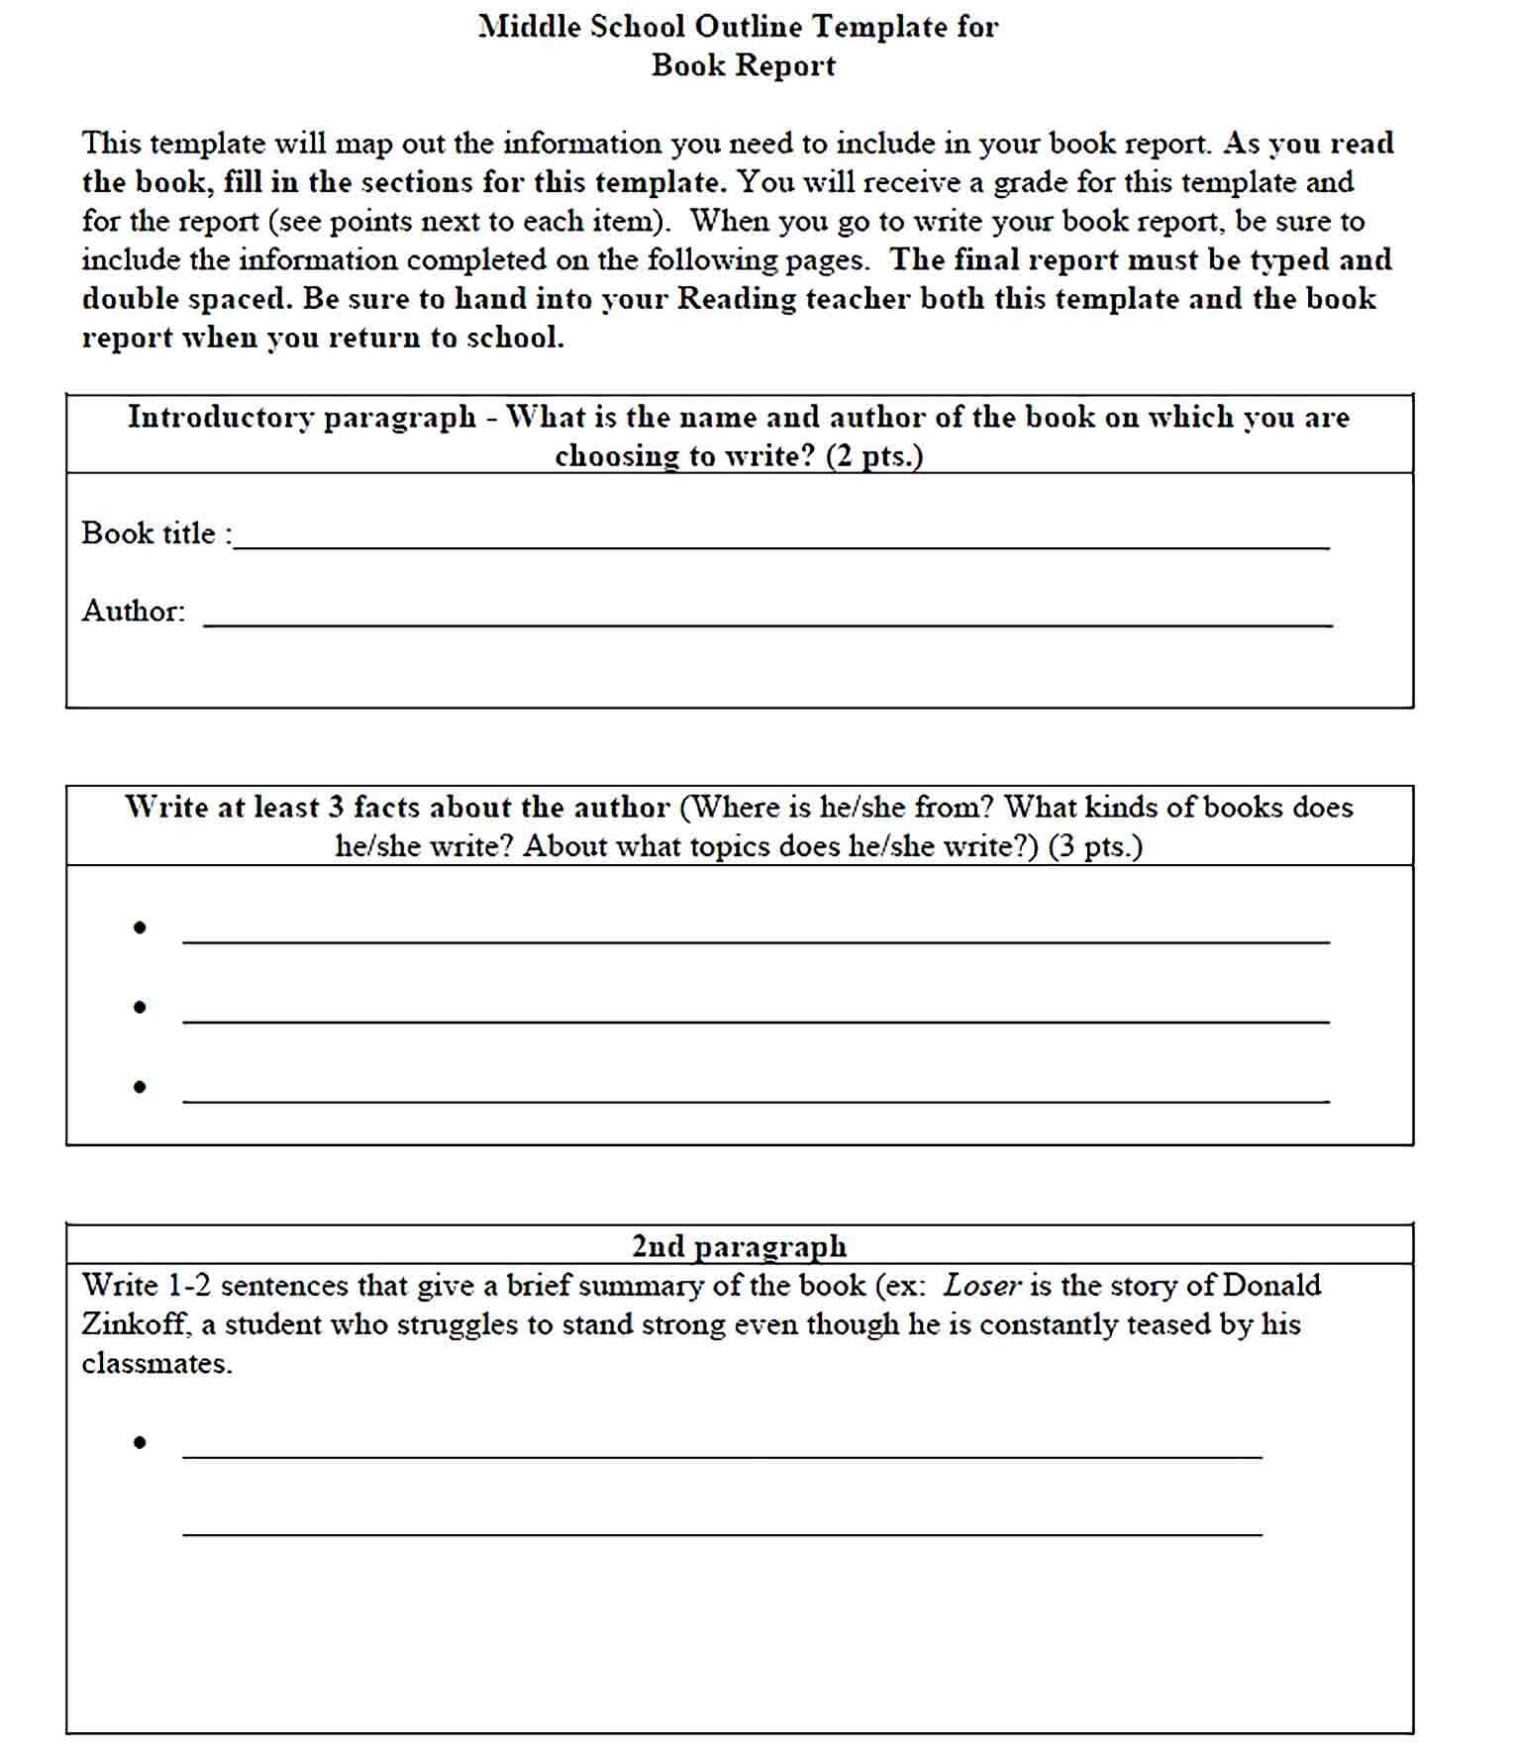 Middle School Book Report Template Intended For Middle School Book Report Template